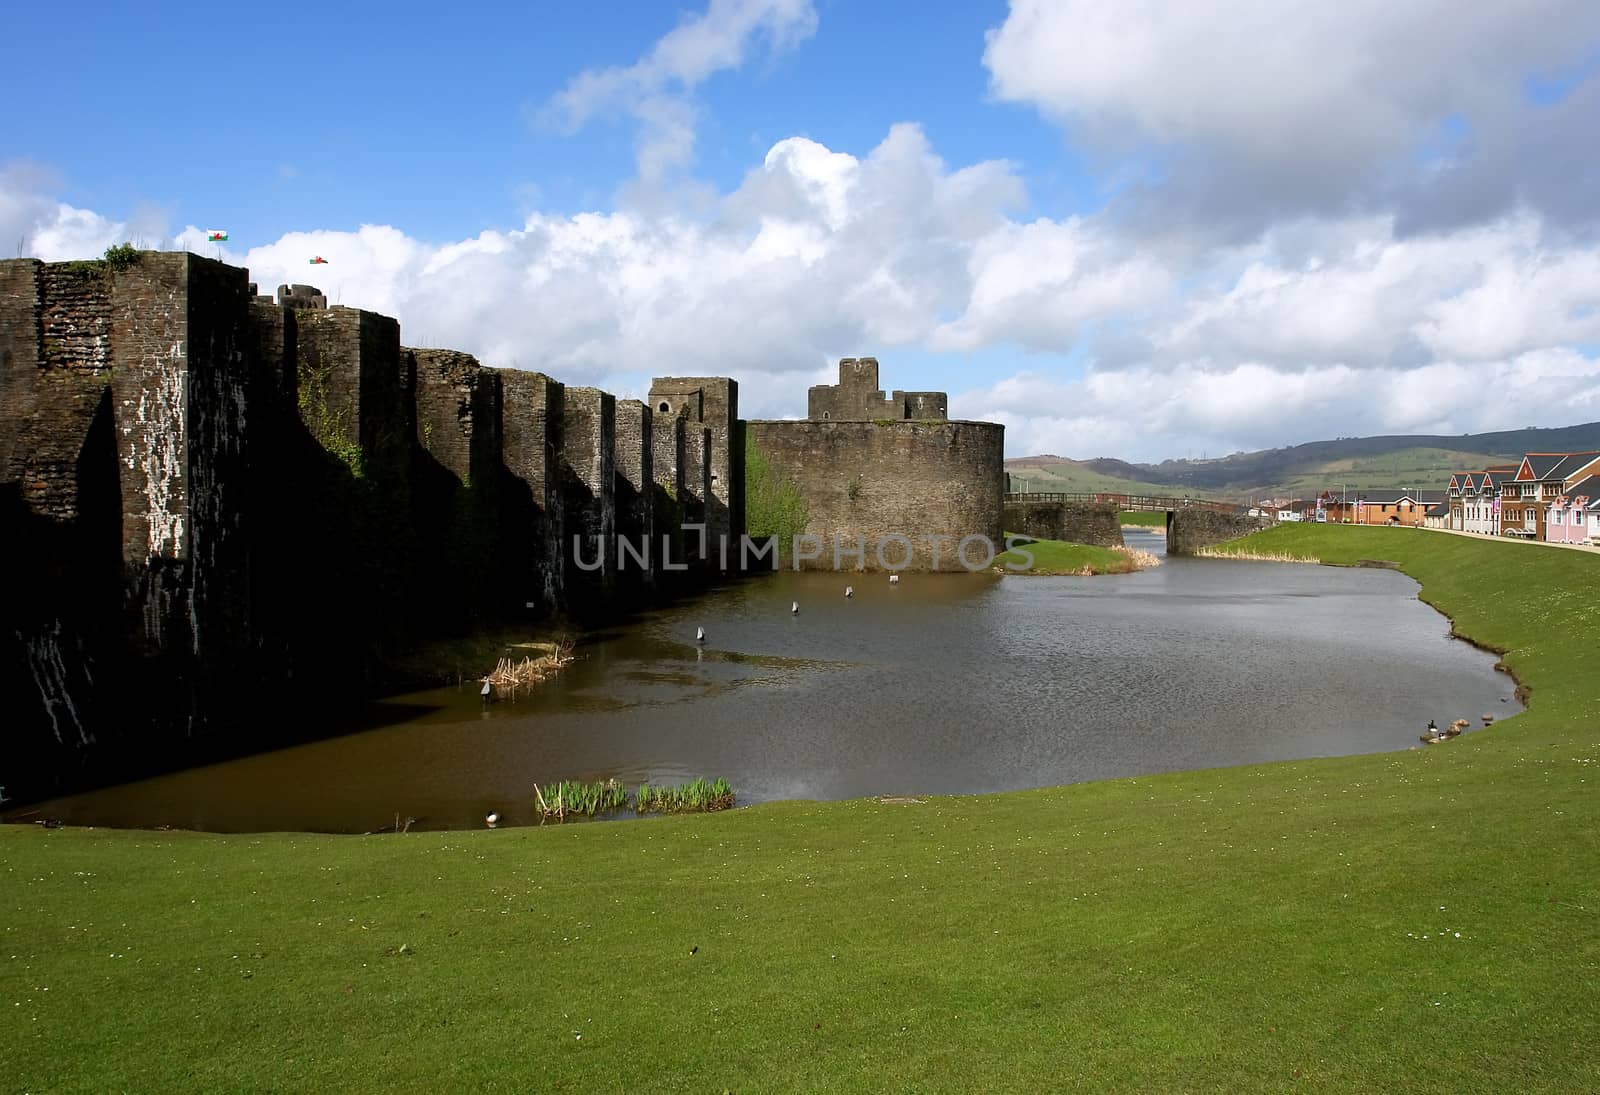 Ruins of Caerphilly Castle, Wales. by ptxgarfield